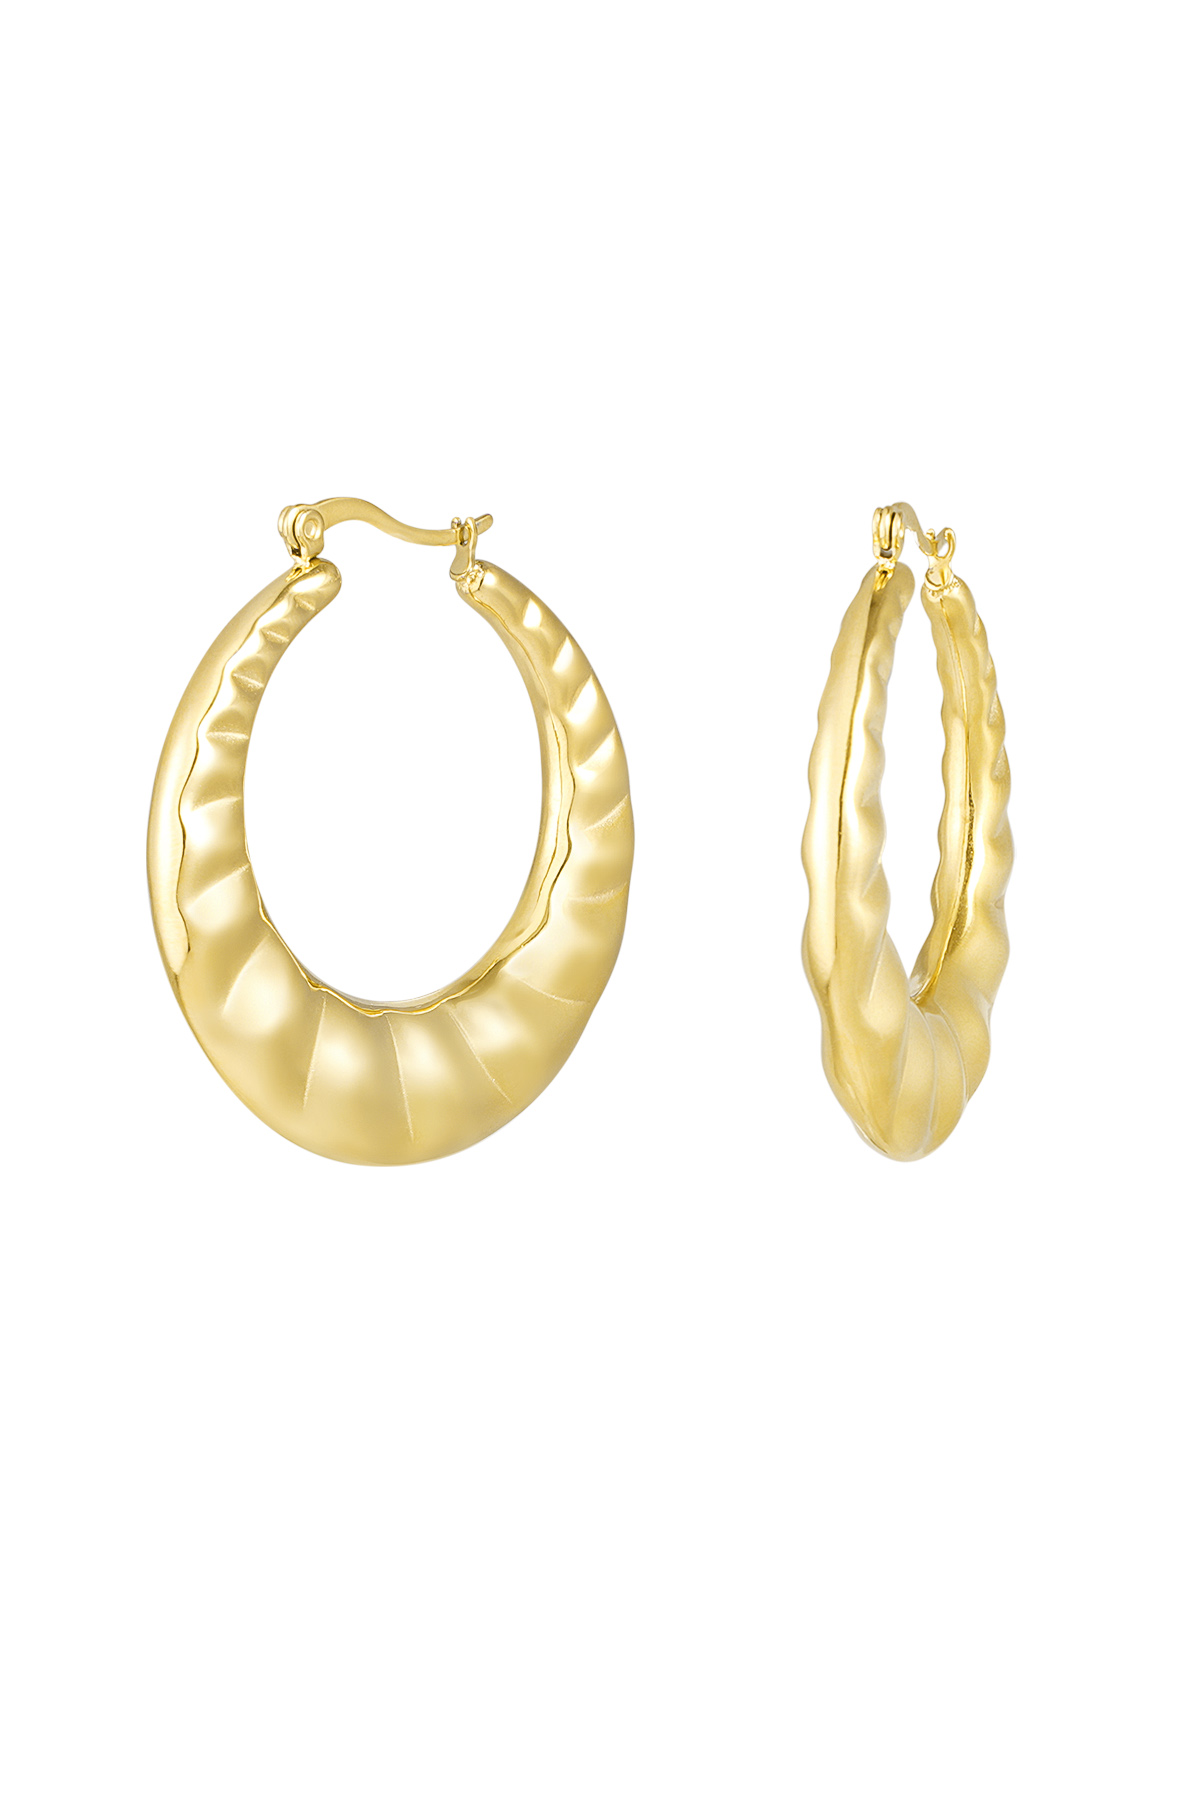 City earrings with a twist - gold